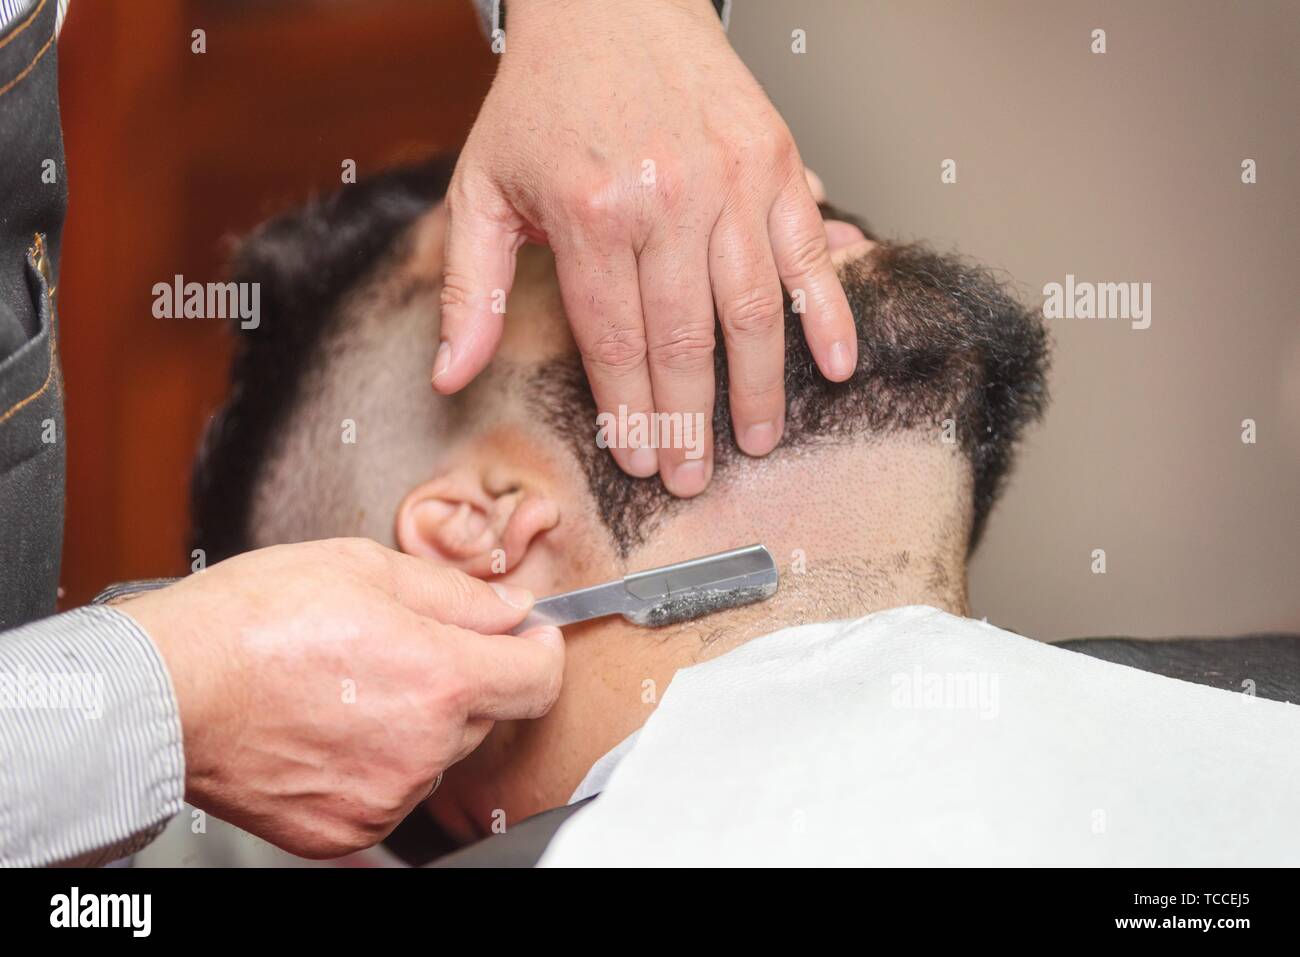 Handsome man having a shave with vintage razor at the barbershop. Stock Photo